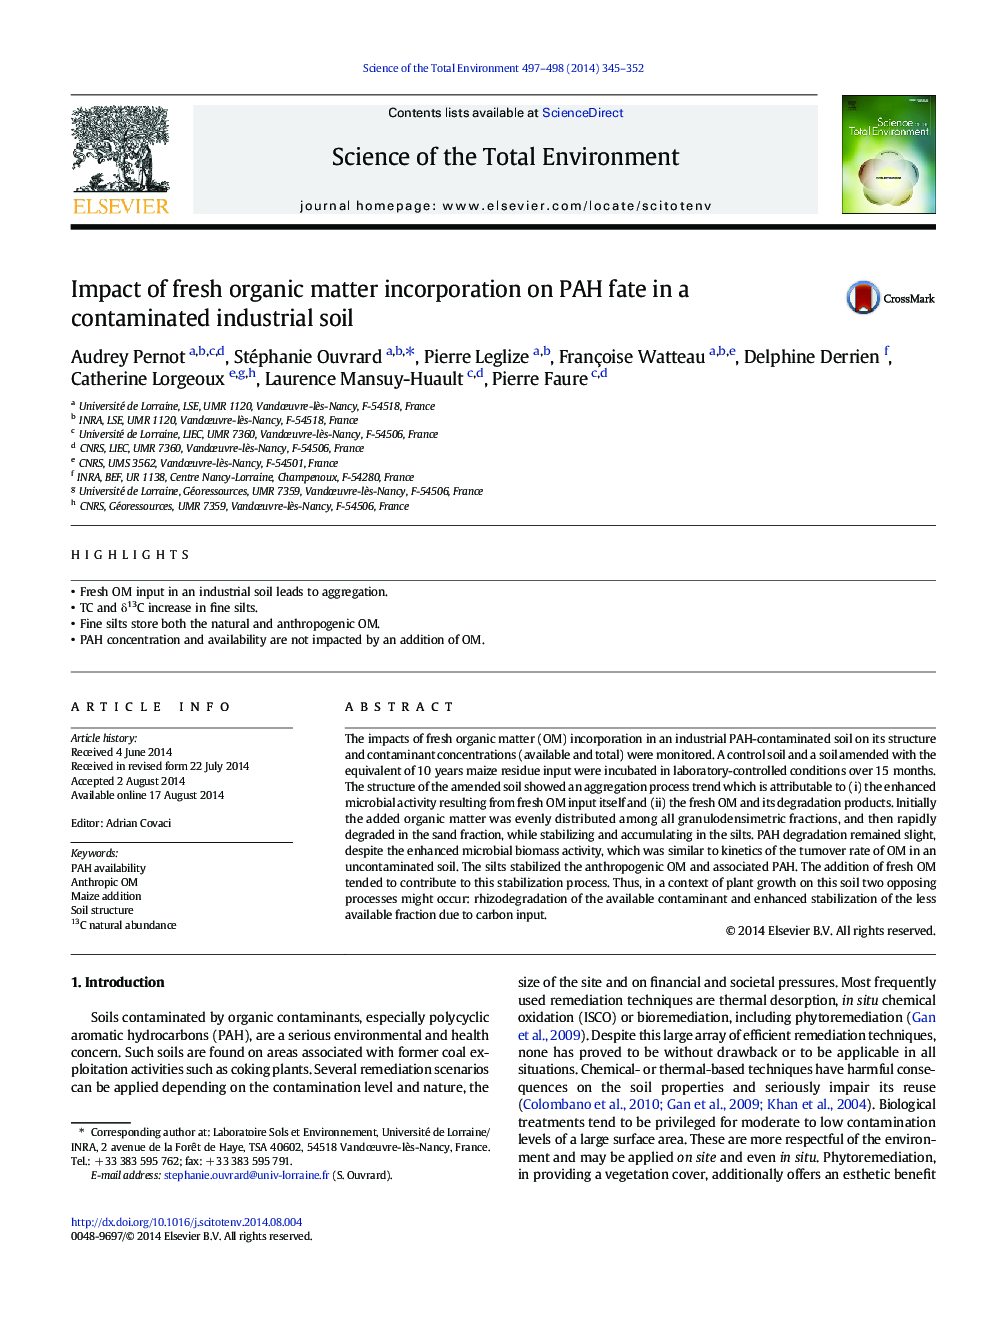 Impact of fresh organic matter incorporation on PAH fate in a contaminated industrial soil